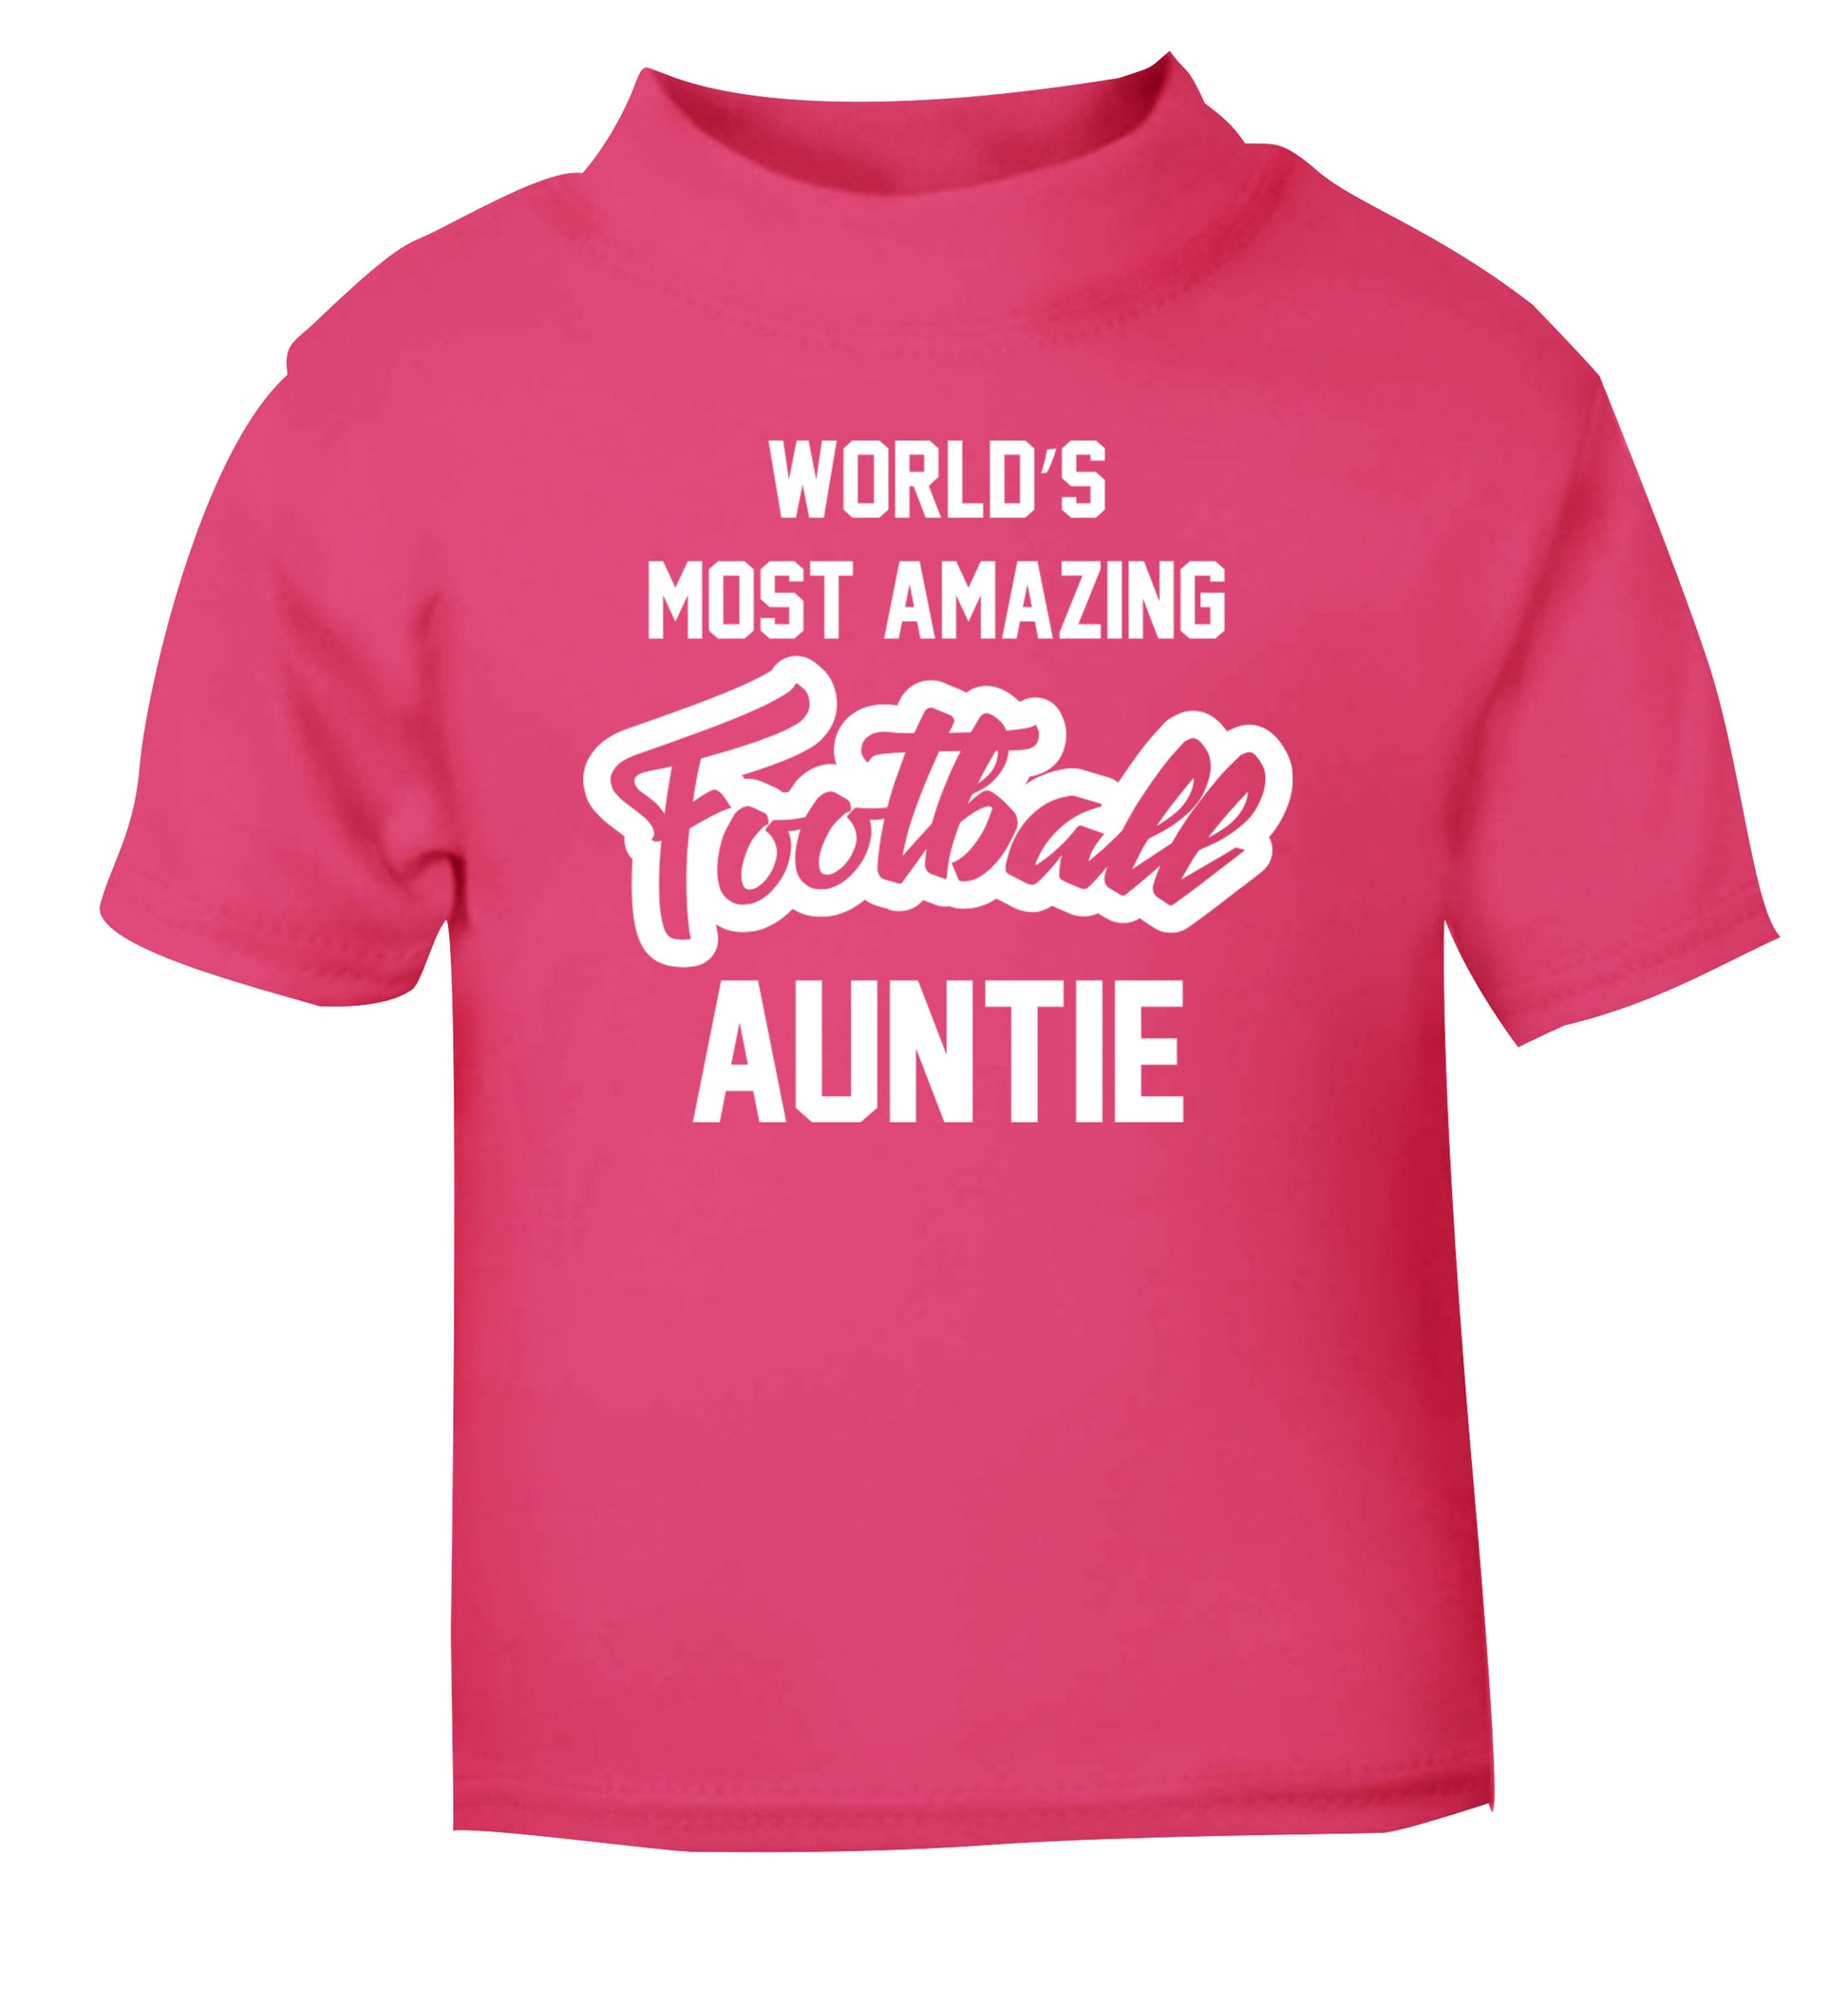 Worlds most amazing football auntie pink Baby Toddler Tshirt 2 Years